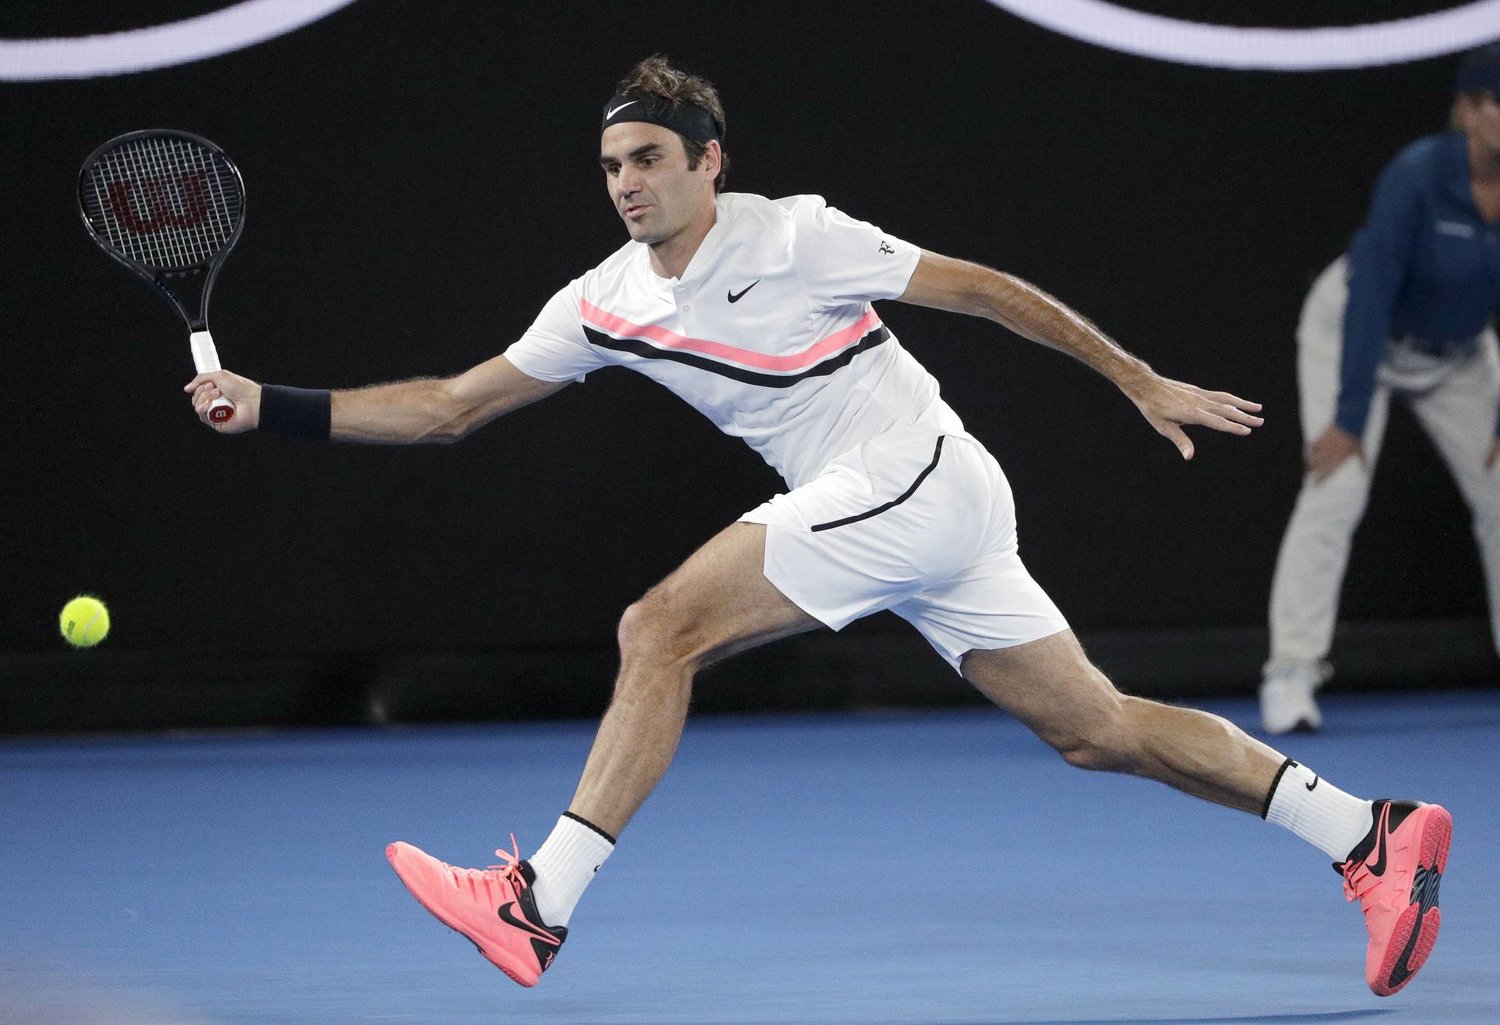 FILE - Switzerland's Roger Federer hits a forehand to Croatia's Marin Cilic during the men's singles final at the Australian Open tennis championships in Melbourne, Australia, on Jan. 28, 2018. (AP Photo/Dita Alangkara, File)